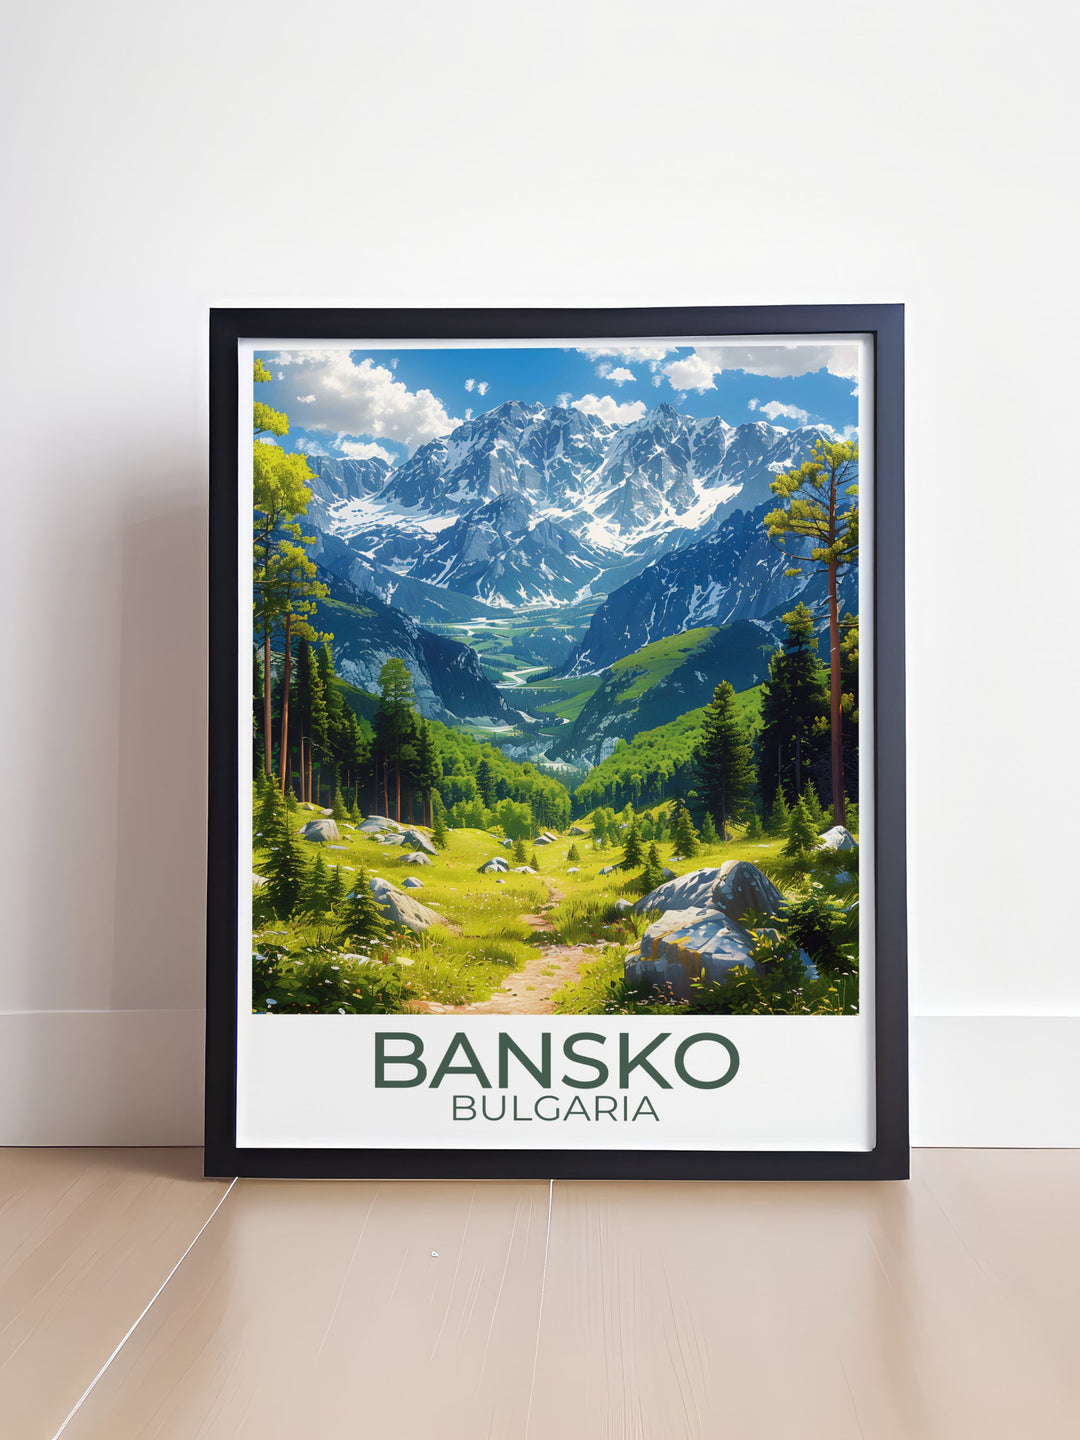 Highlighting the natural beauty of the Pirin Mountains, this travel poster showcases the stunning peaks and alpine meadows, perfect for nature enthusiasts and home decor lovers.